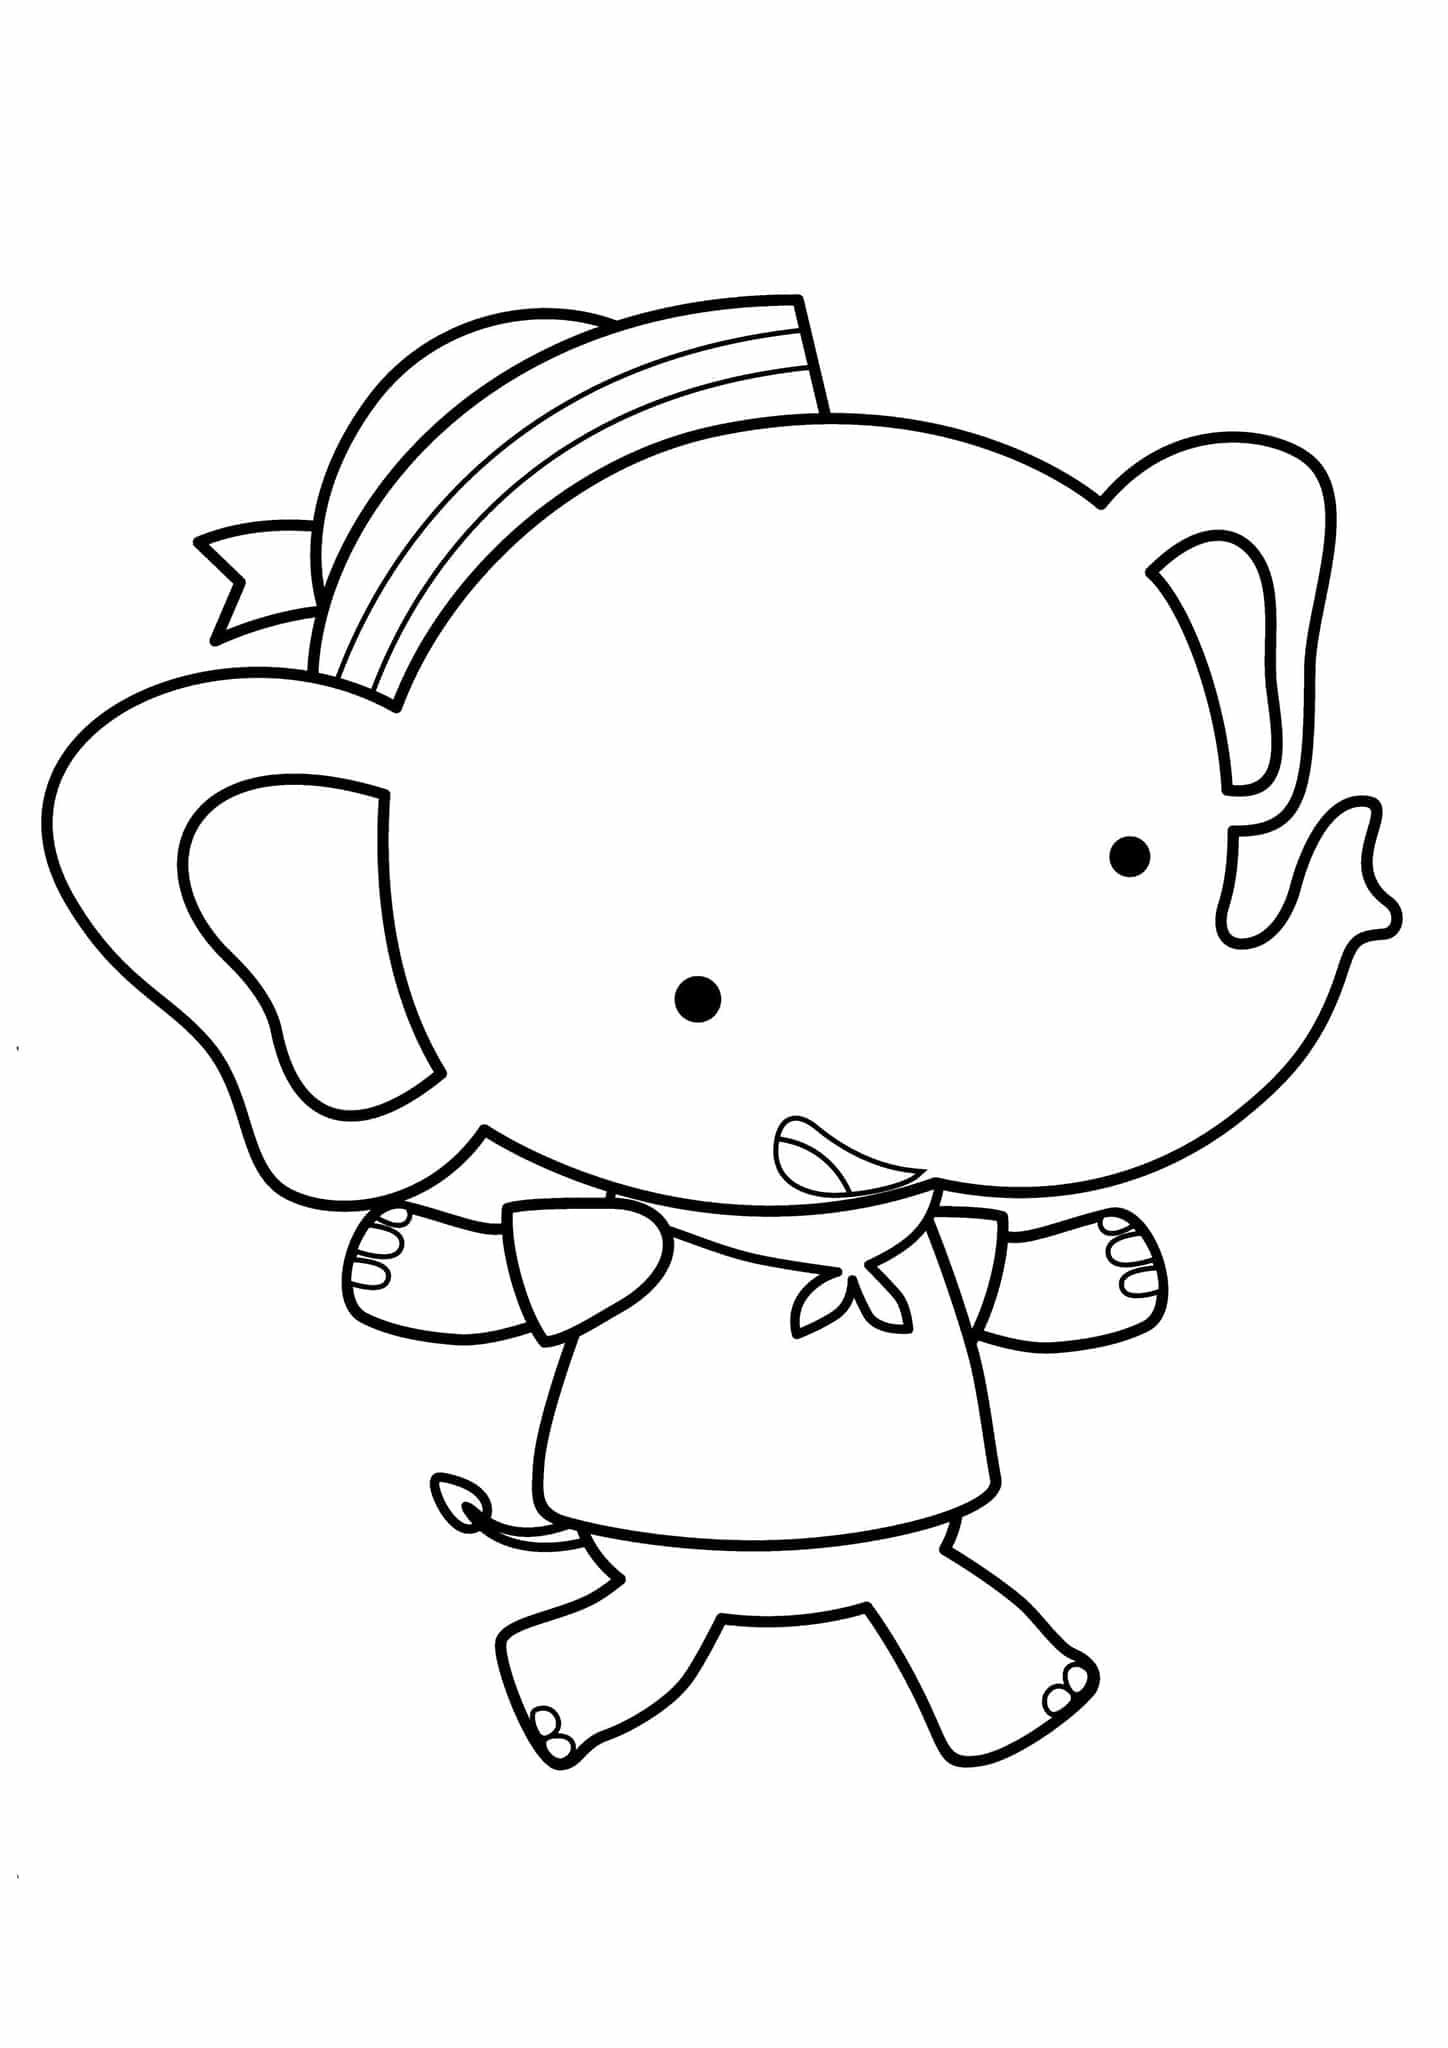 Download Free & Easy To Print Elephant Coloring Pages - Tulamama